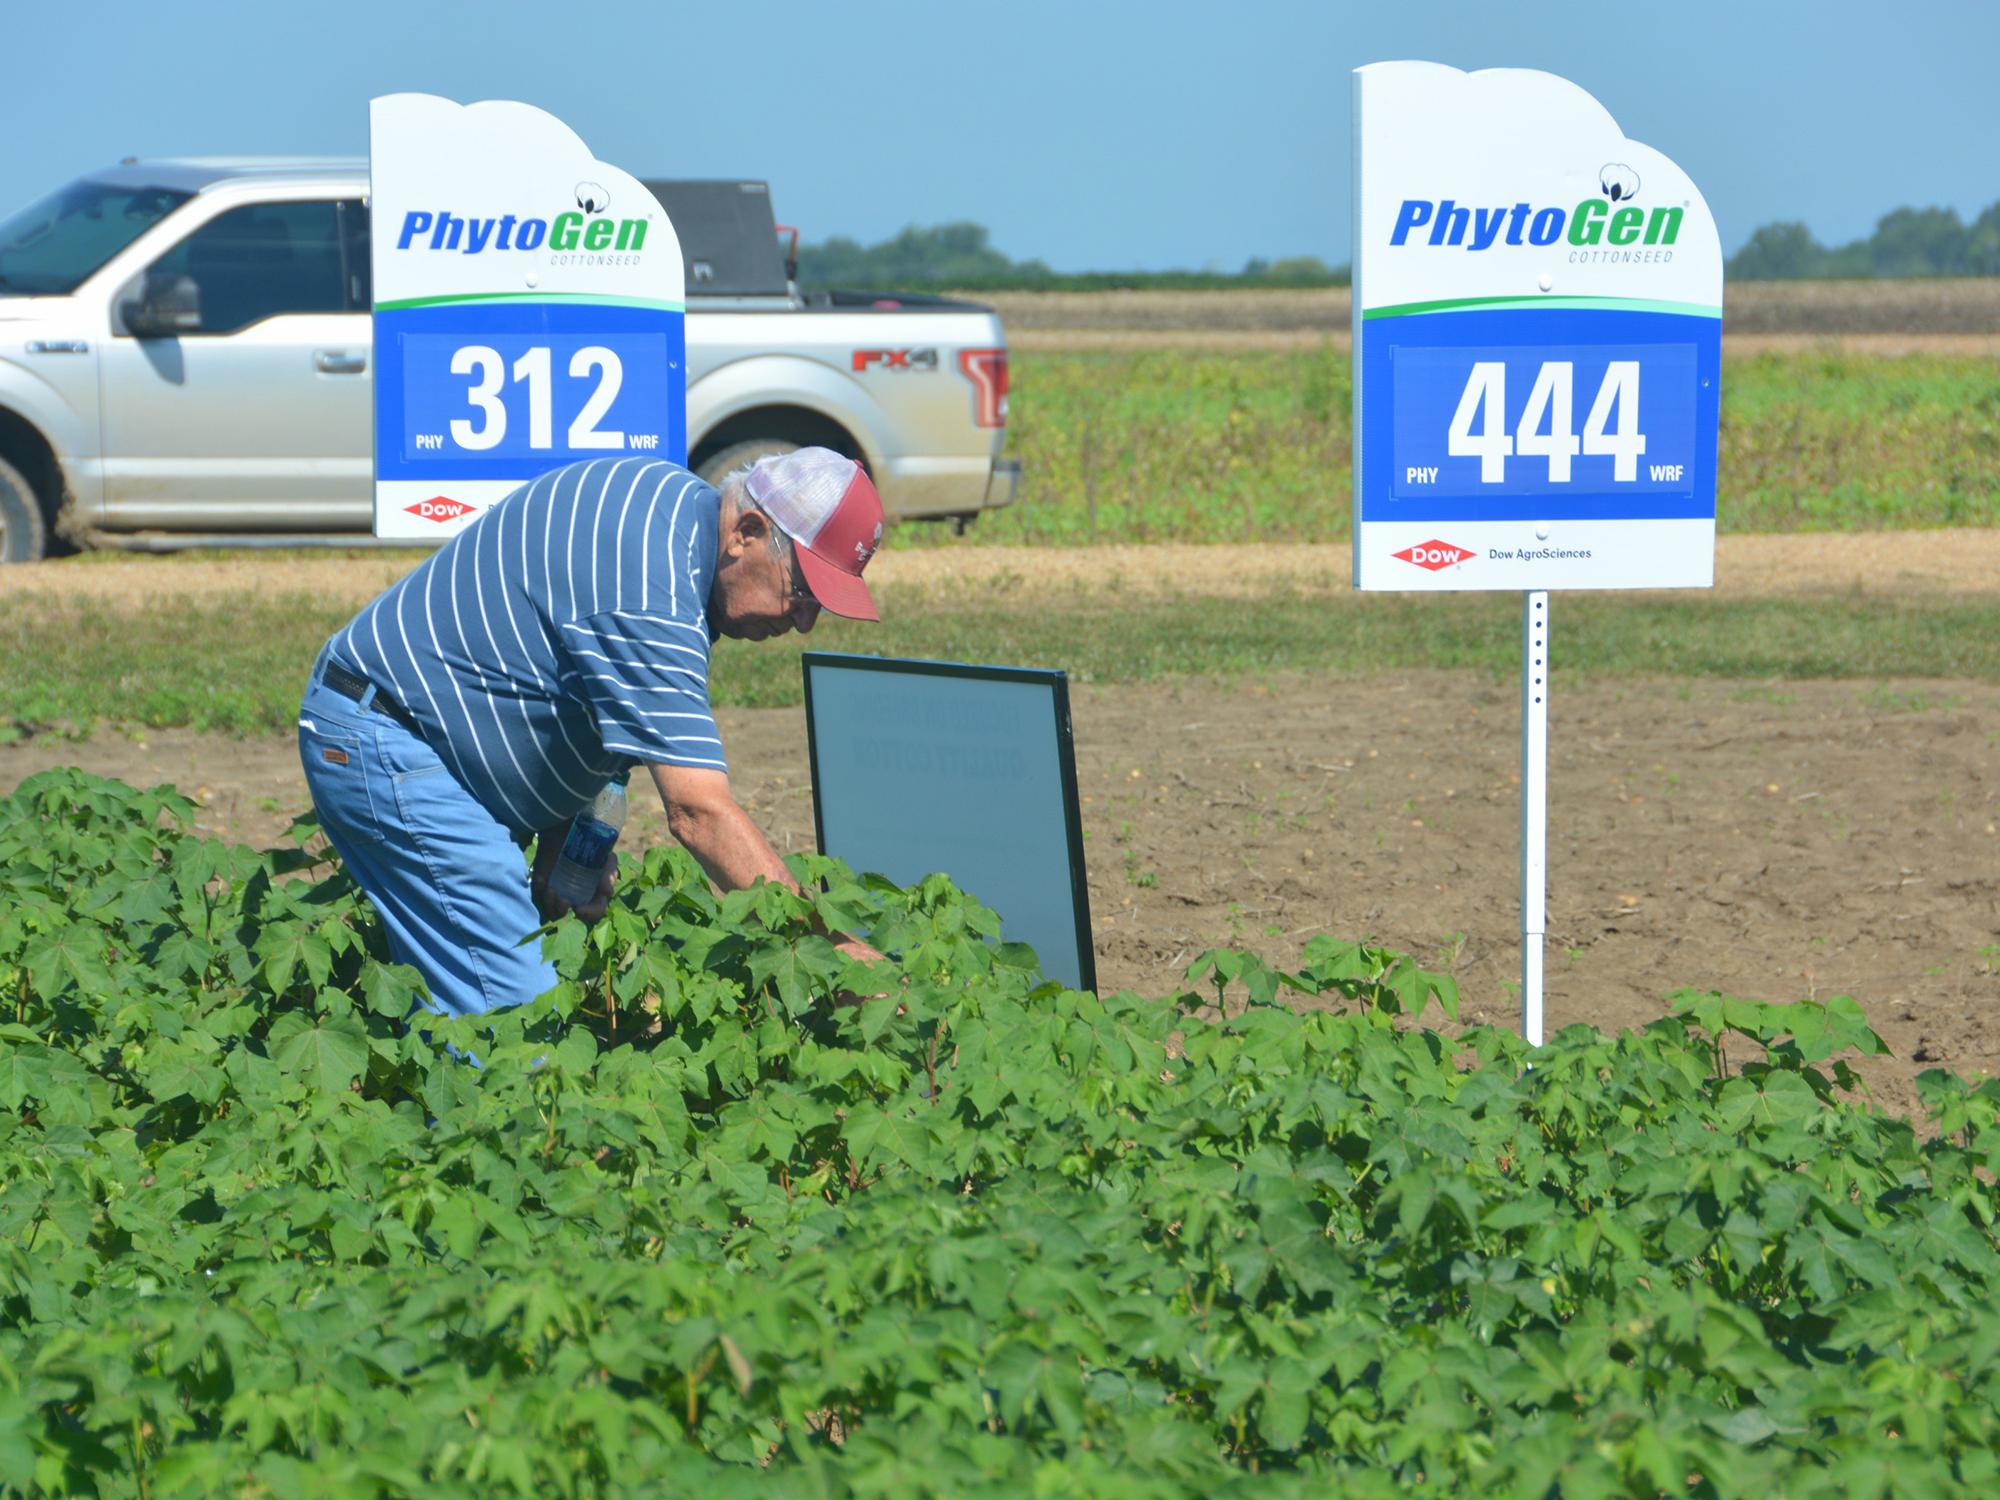 Award-winning farmer Paul Good examines cotton growing in Noxubee County during a Mississippi State University field tour on July 12, 2017. Good said he remembers a time when farmers did not grow cotton in the area, mostly because of boll weevils. (Photo by MSU Extension Service/Linda Breazeale)